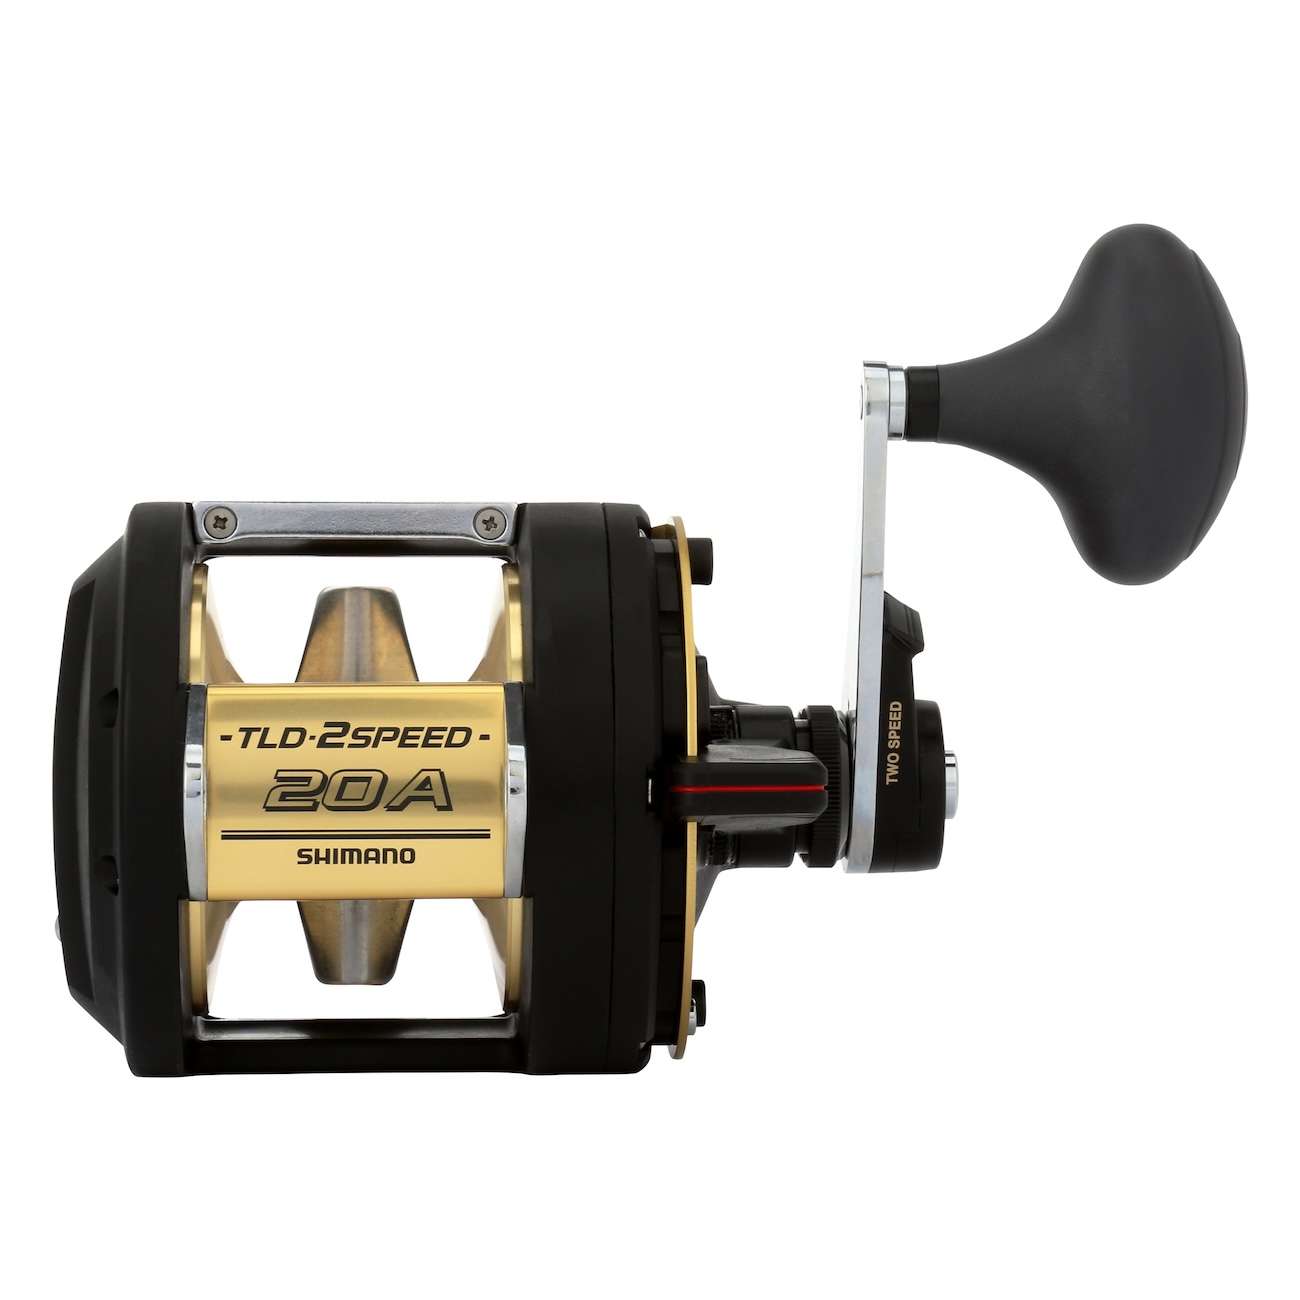 Take advantage of the offer of one of Shimano's best Reel the